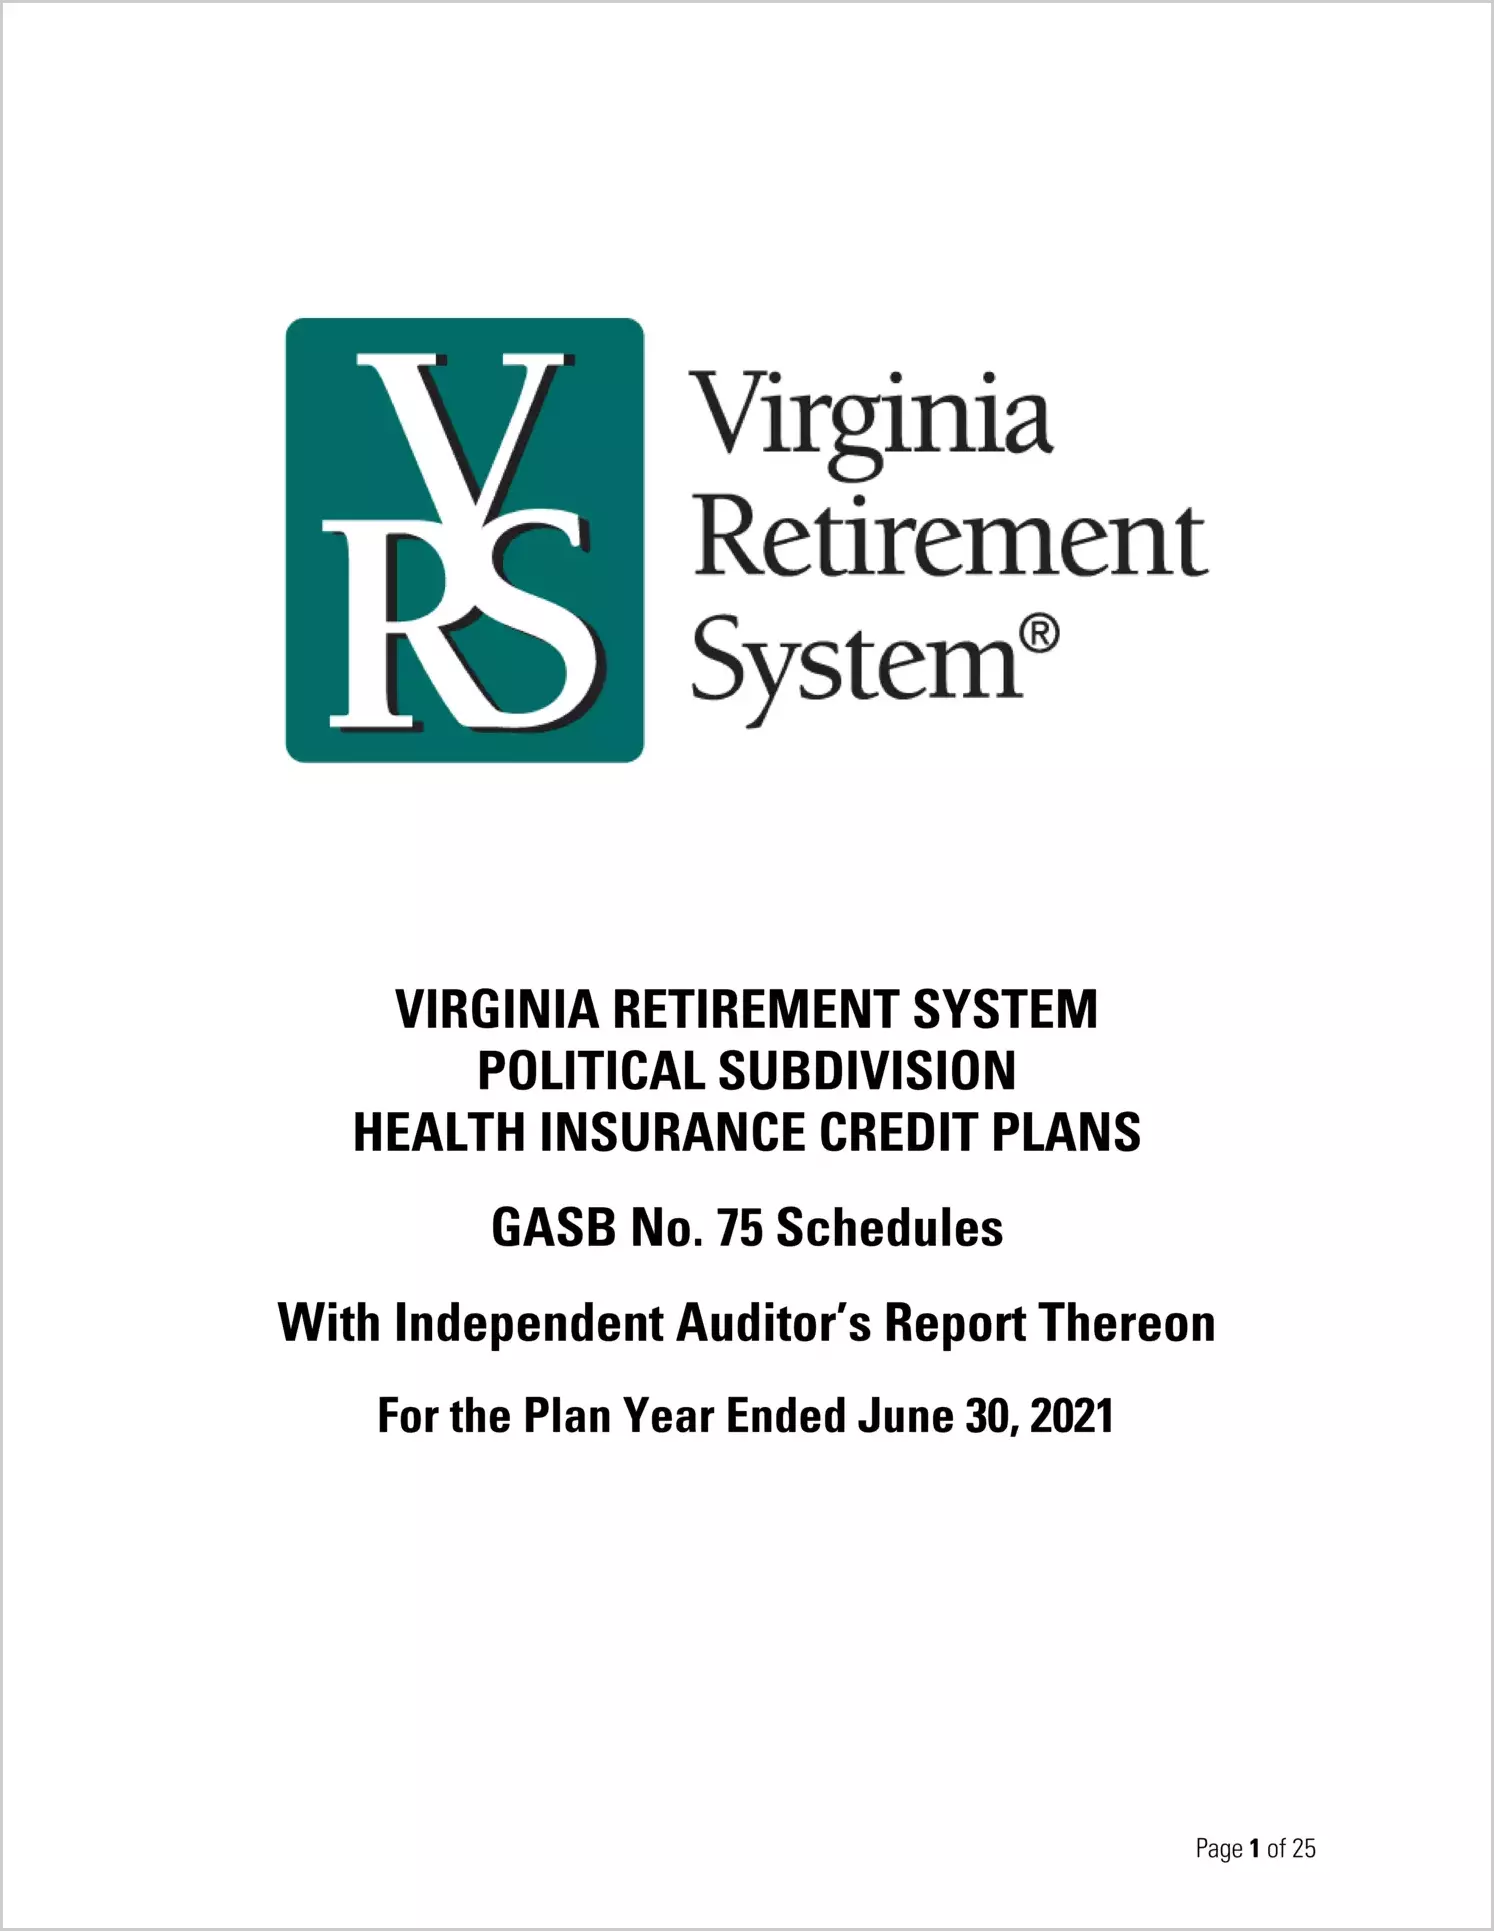 GASB 75 Schedules - Virginia Retirement System Political Subdivision Health Insurance Credit Plans for the year ended June 30, 2021